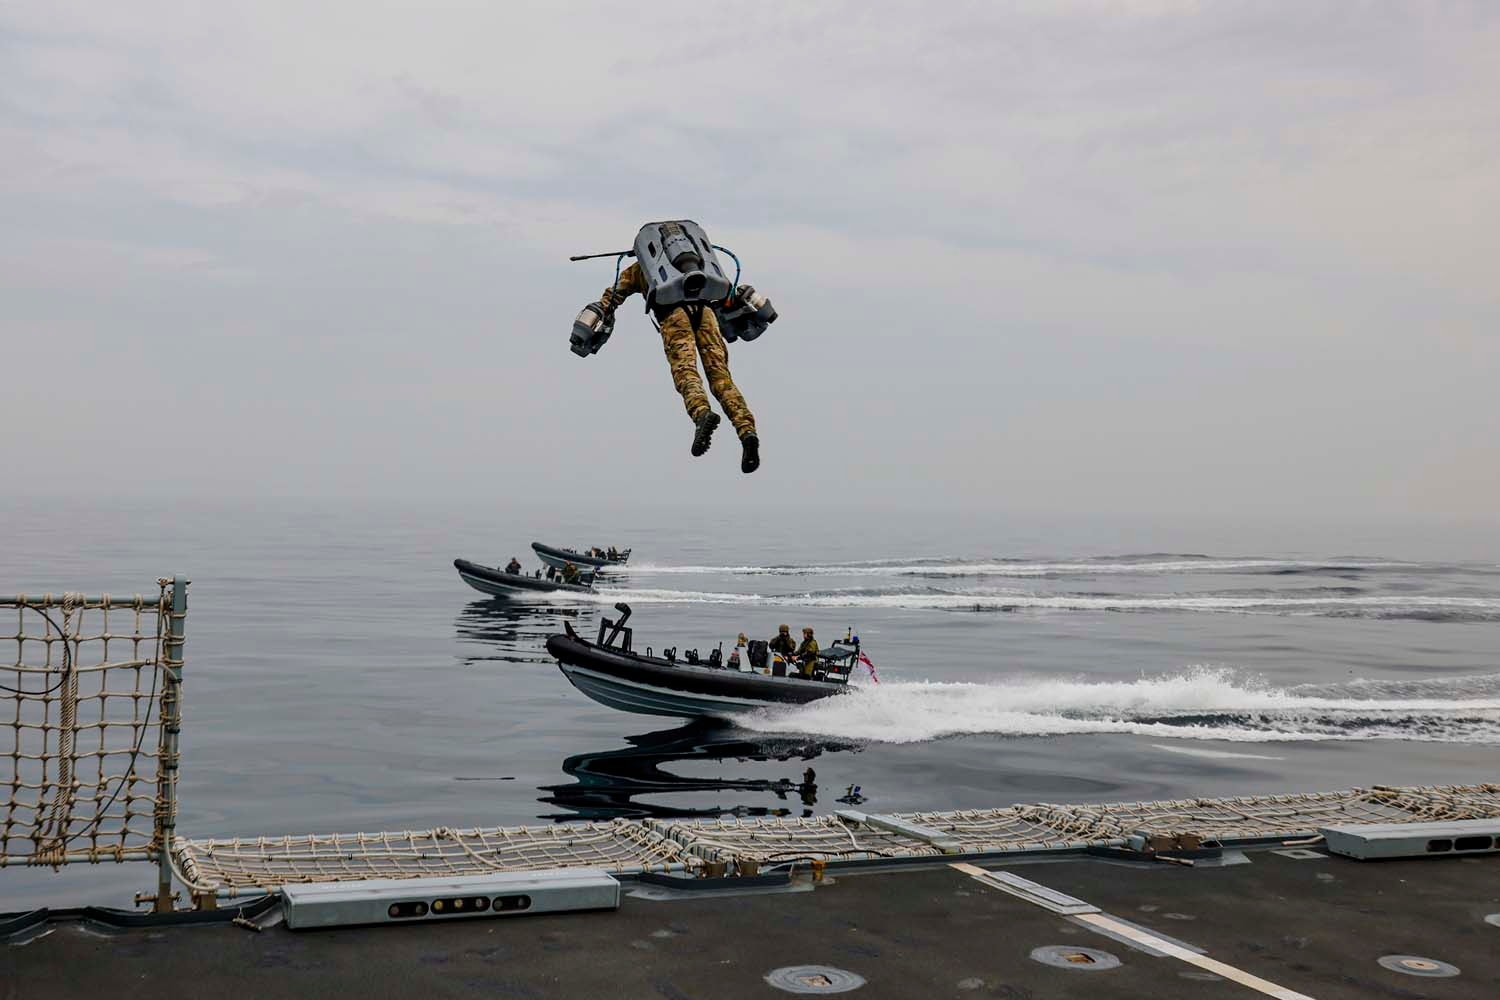 Royal Marines Say Jetpacks Are Not Ready for the Battlefield ...